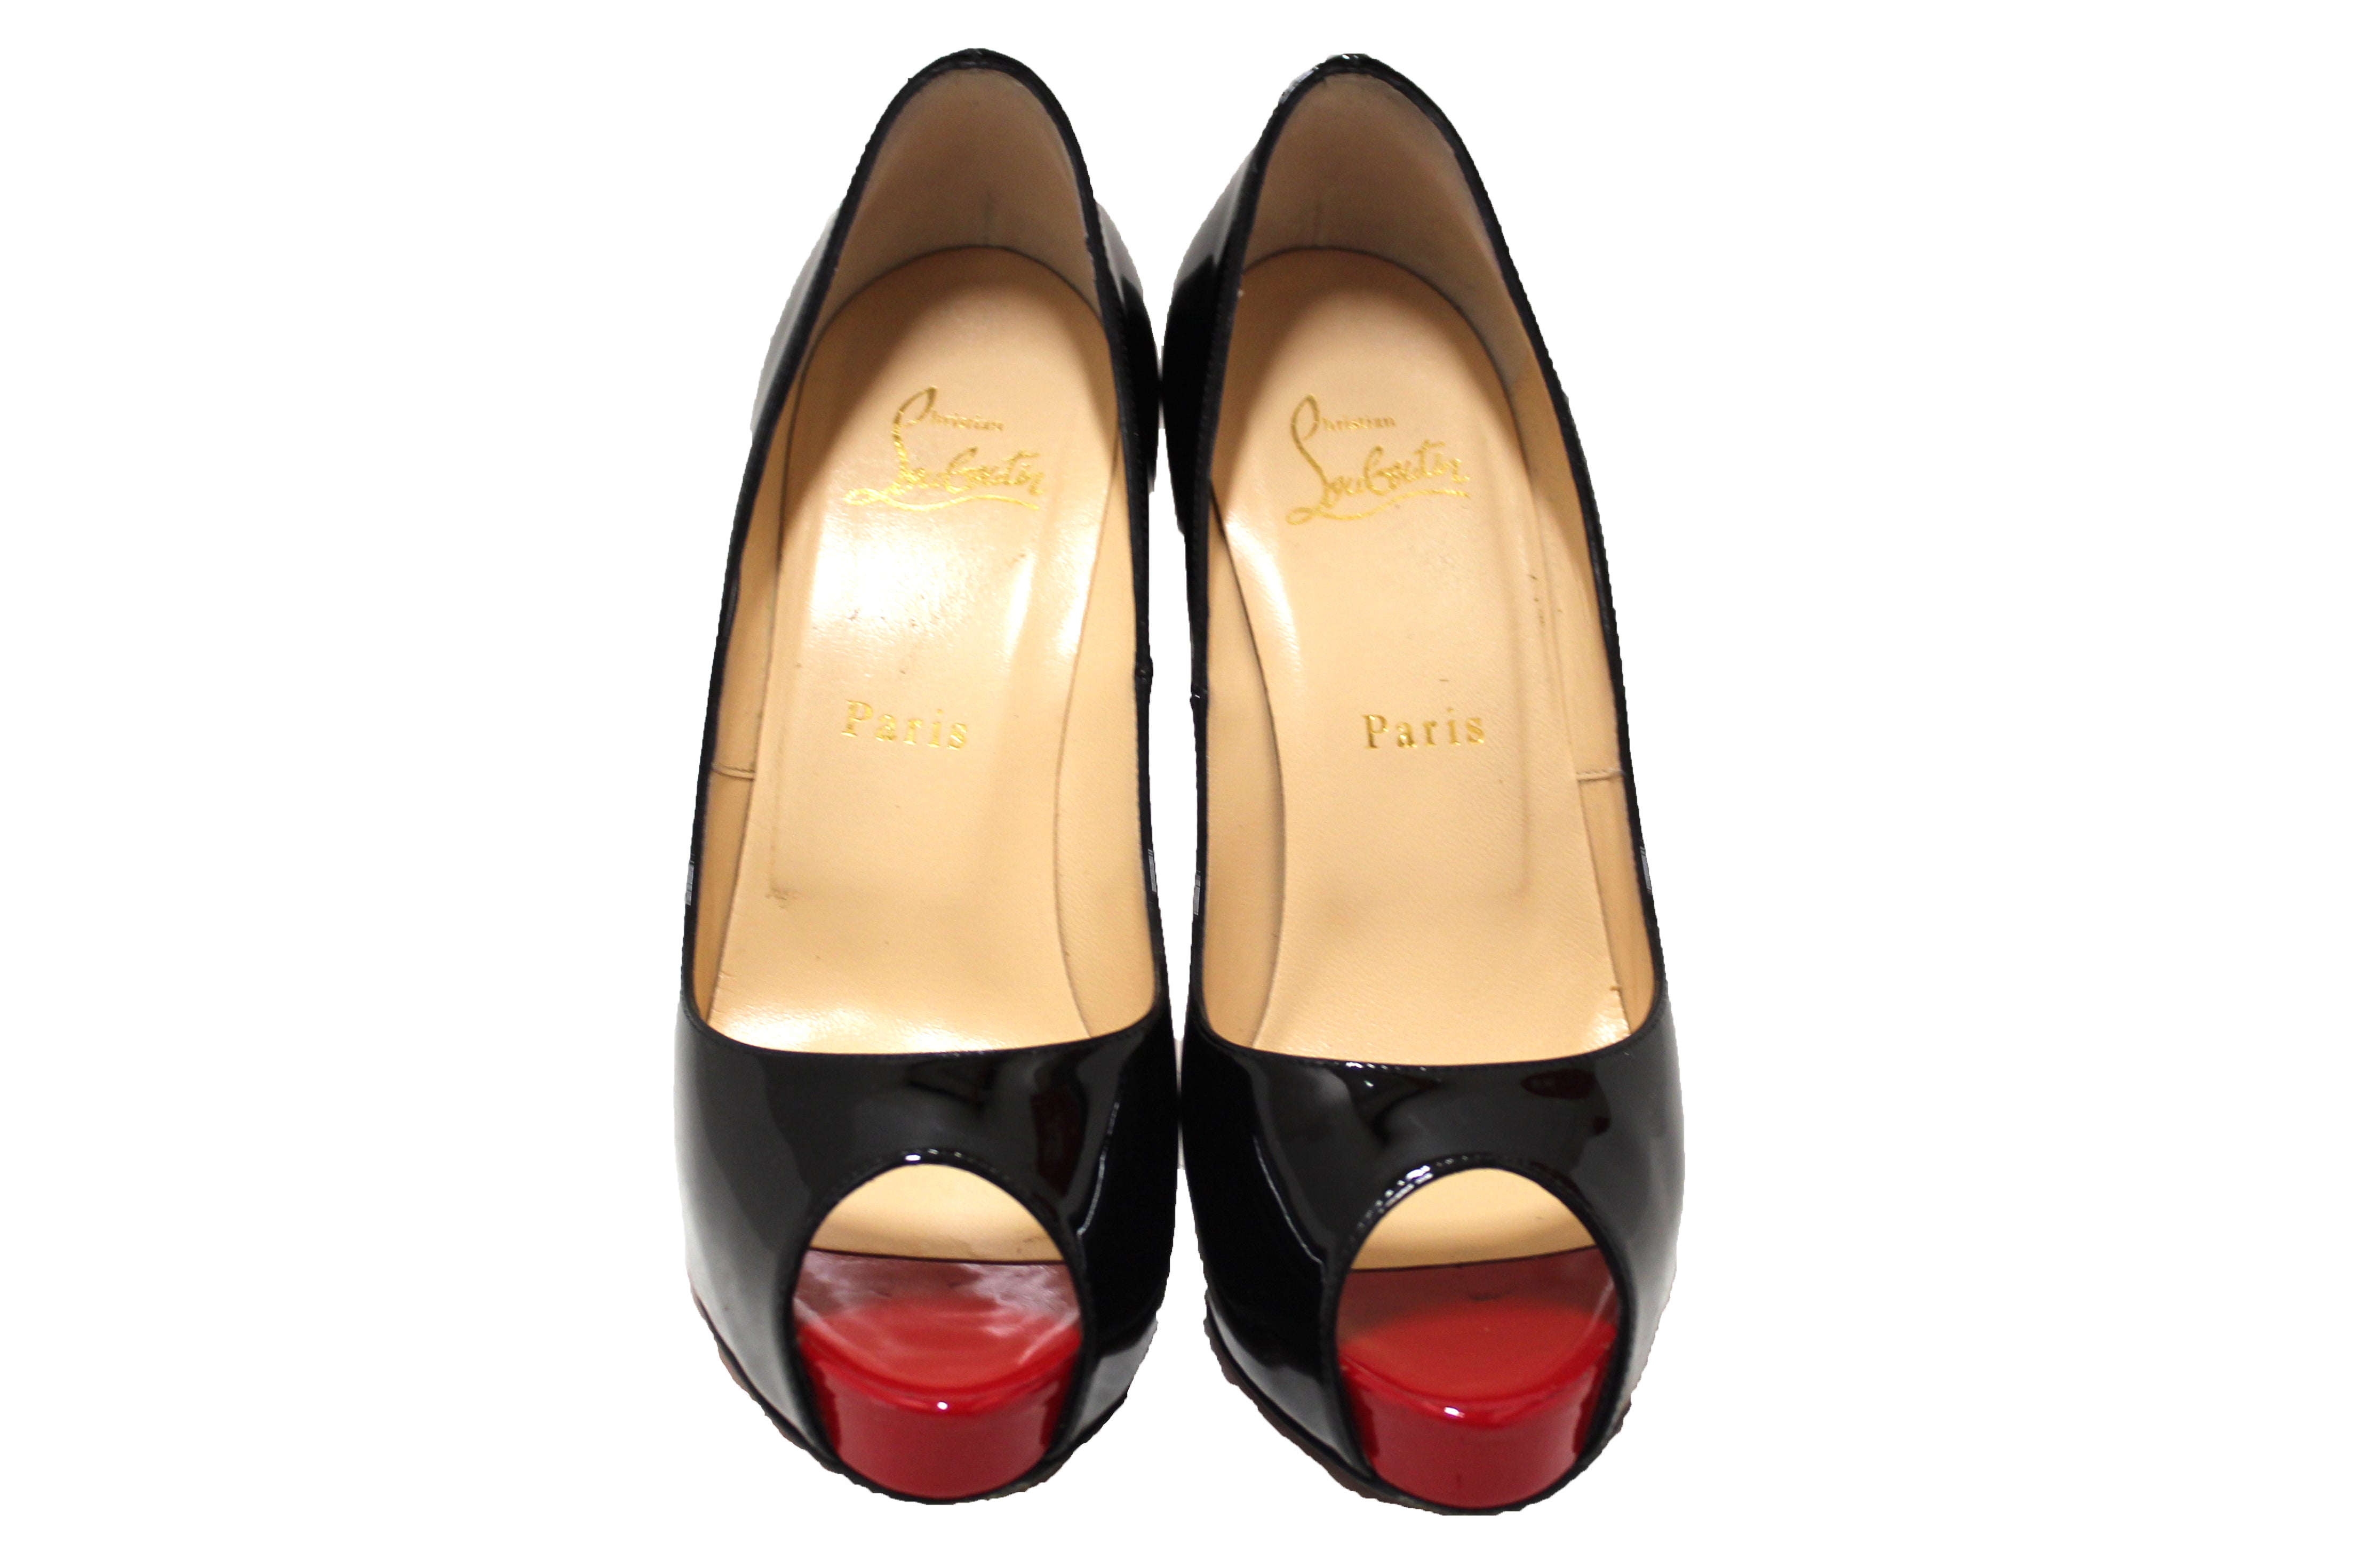 Christian Louboutin New Very Prive 120 pumps for Women - Black in